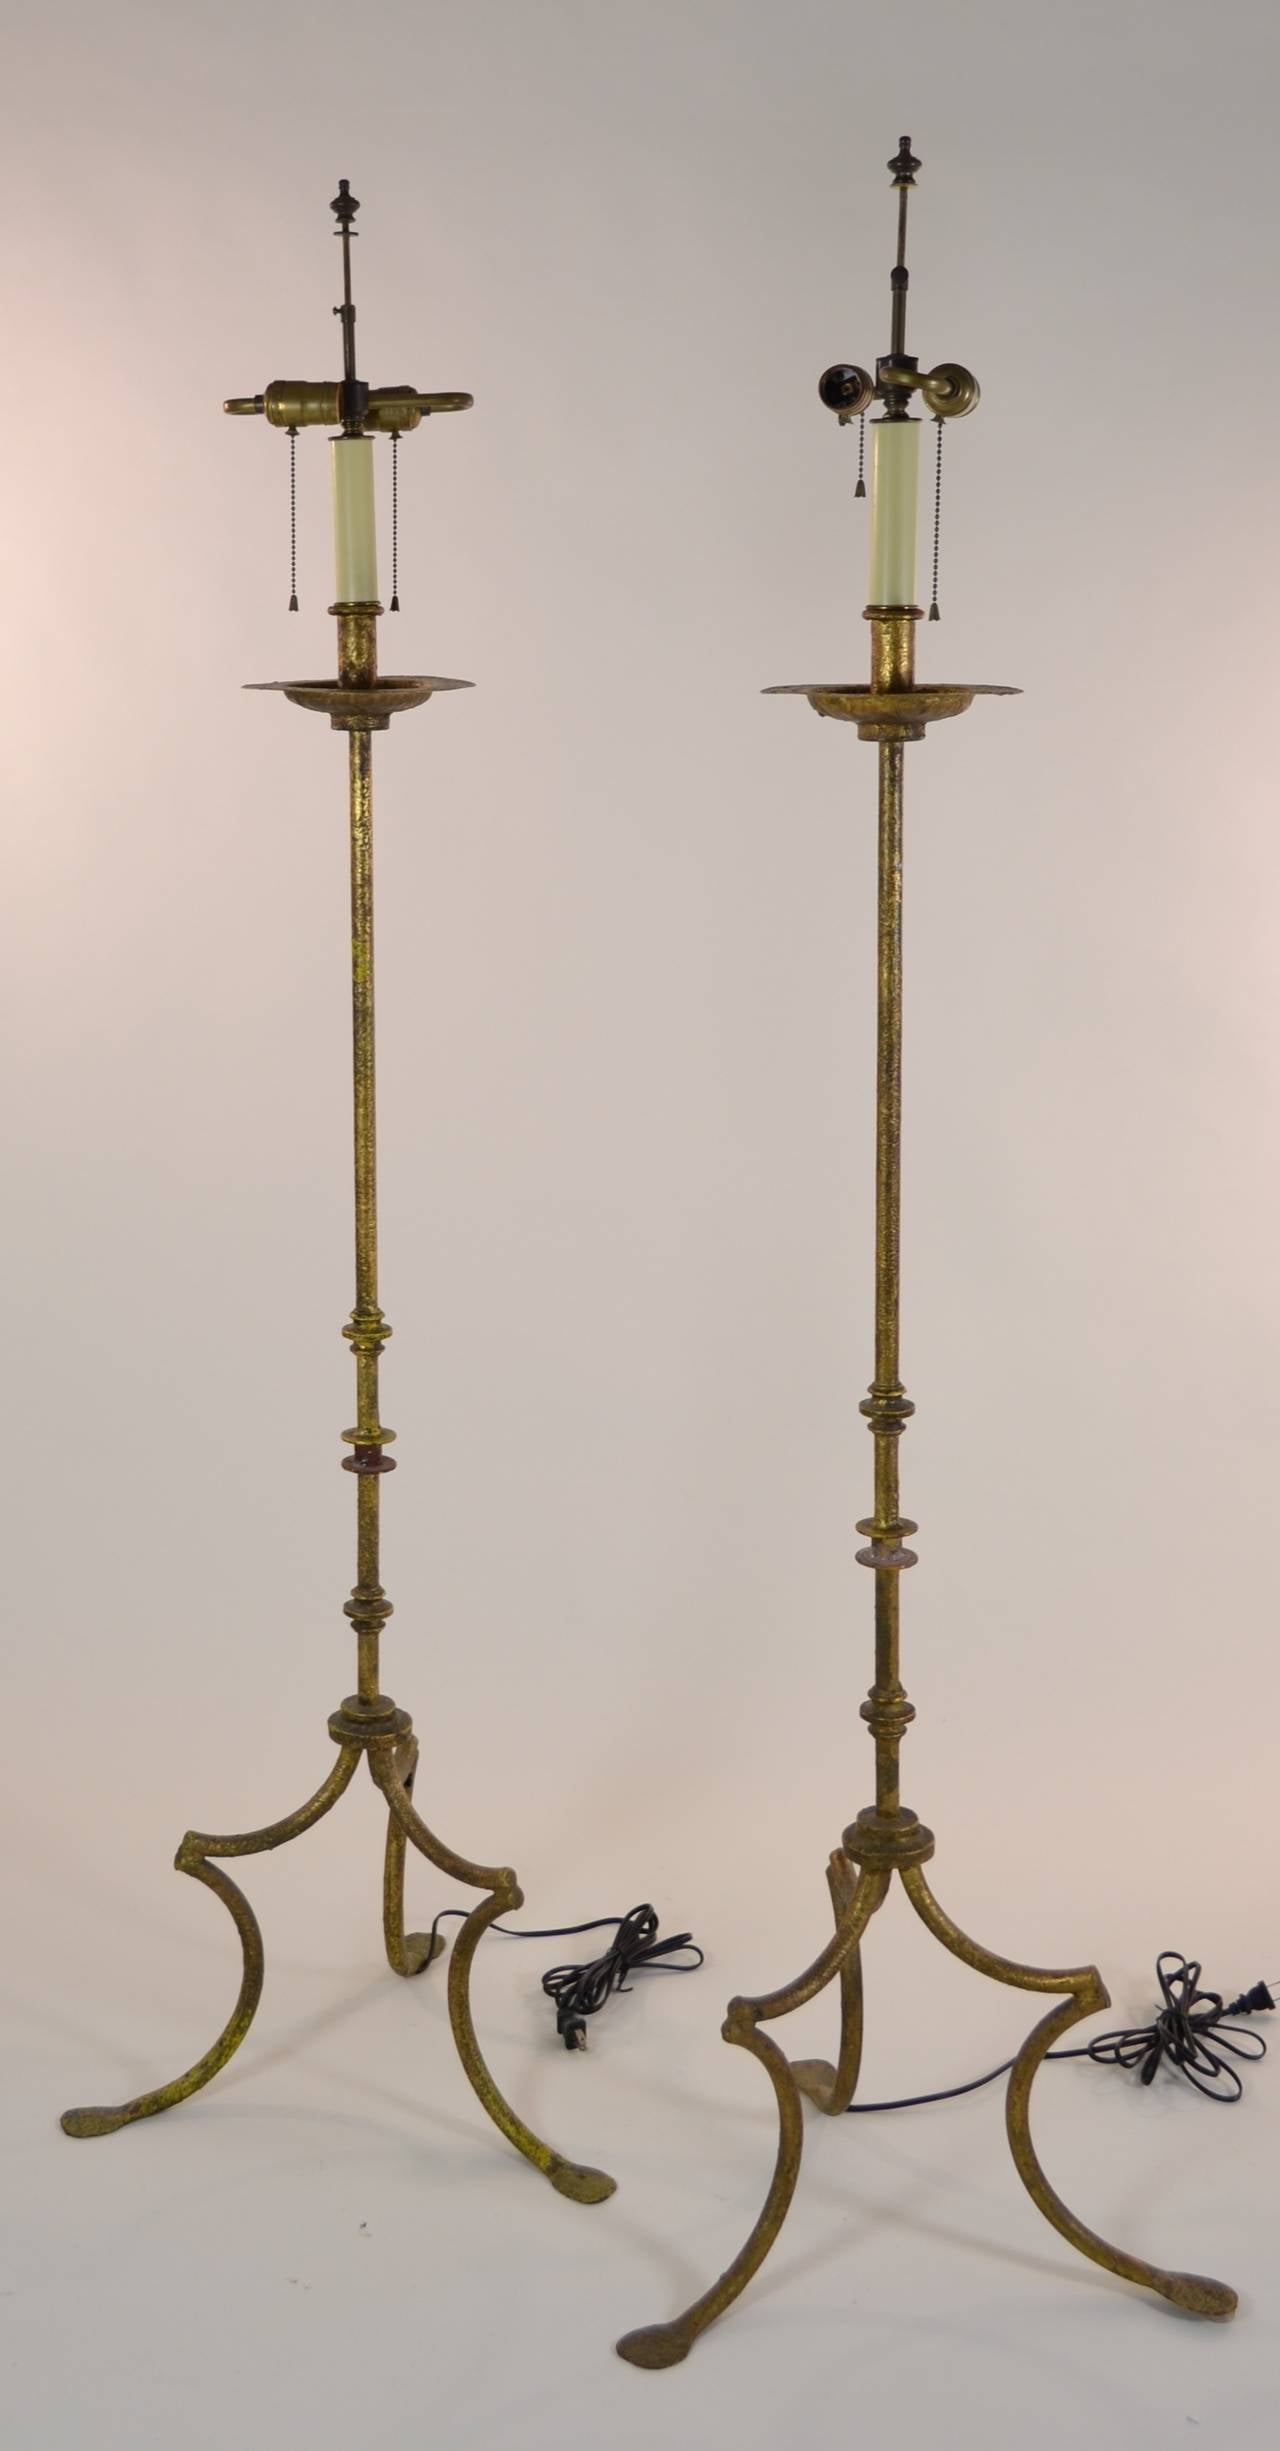 Pair of Mediterranean-style floor lamps in gilt finished iron. New wiring. Circa 1950s. Lamps are 18